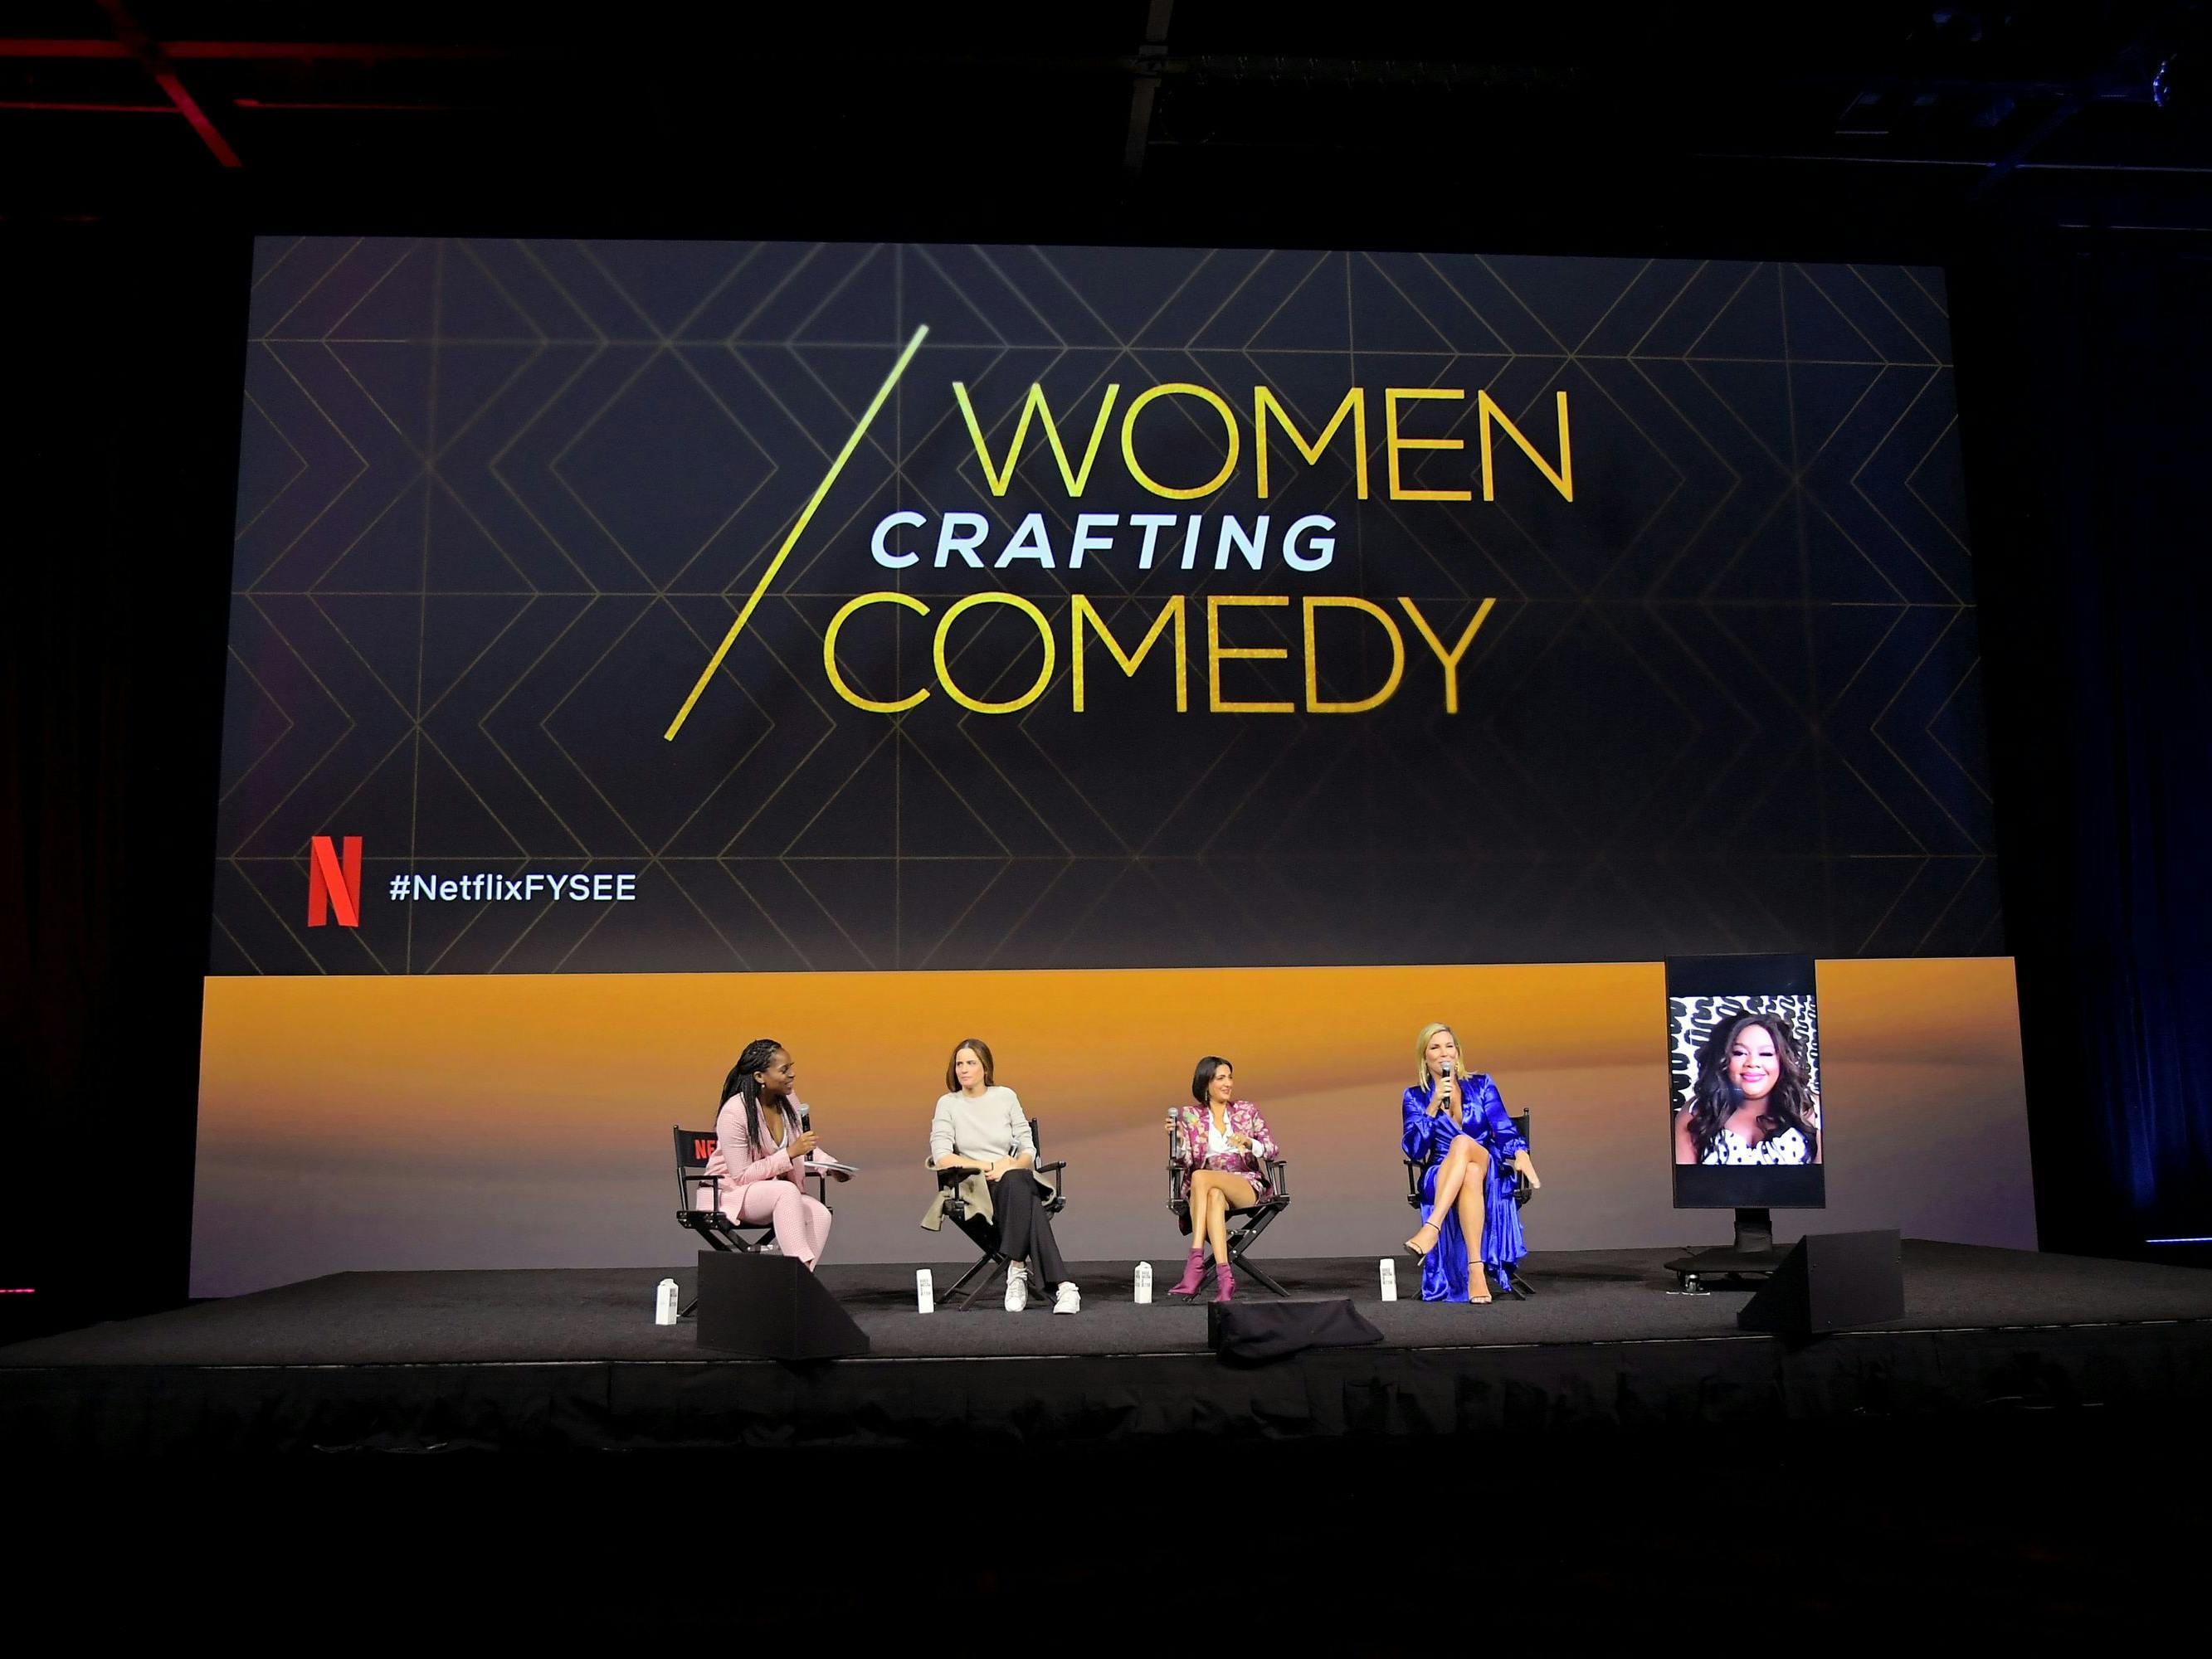 People Magazine's Janine Rubenstein, Amanda Peet (The Chair), Poorna Jagannathan (Never Have I Ever), June Diane Raphael (Grace and Frankie), and Nicole Byer (Nailed It!) sit onstage.